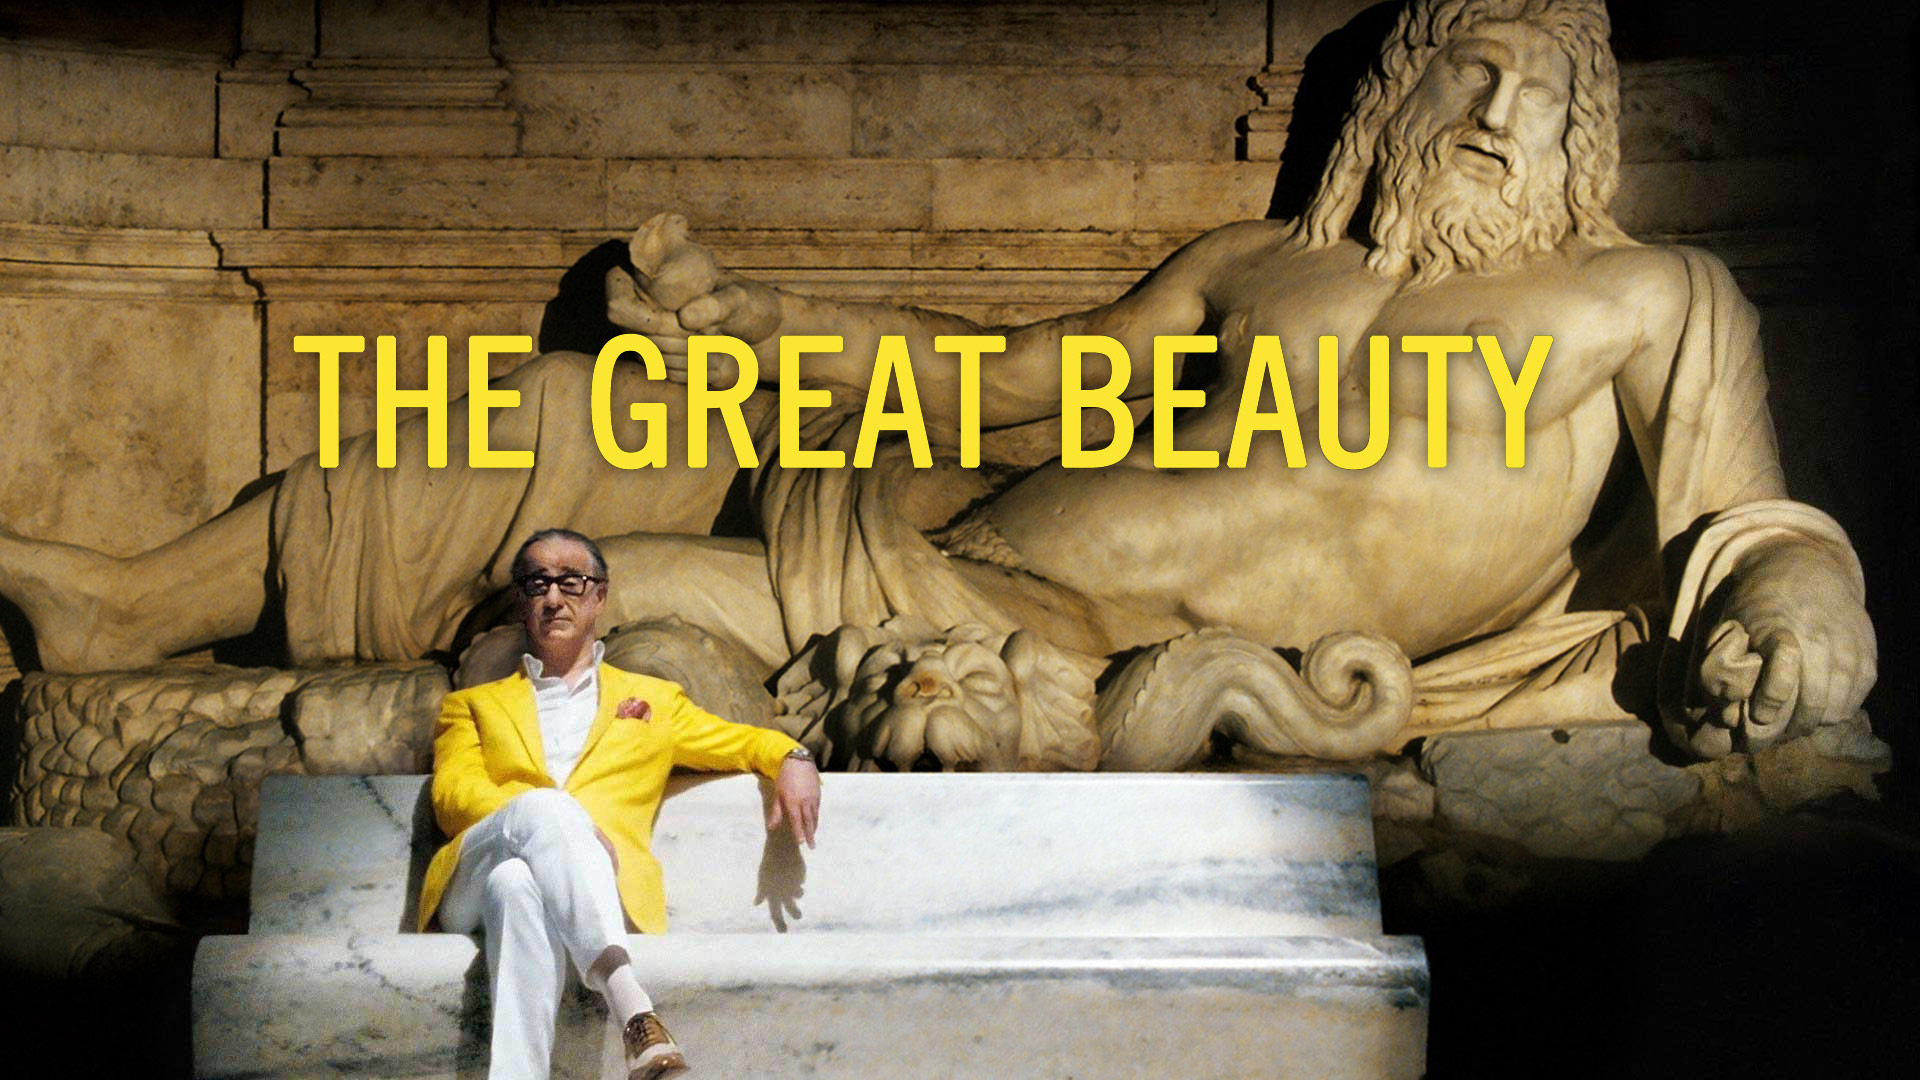 The Great Beauty: Received the Golden Globe Award for Best Foreign Language Film in 2013. 1920x1080 Full HD Wallpaper.